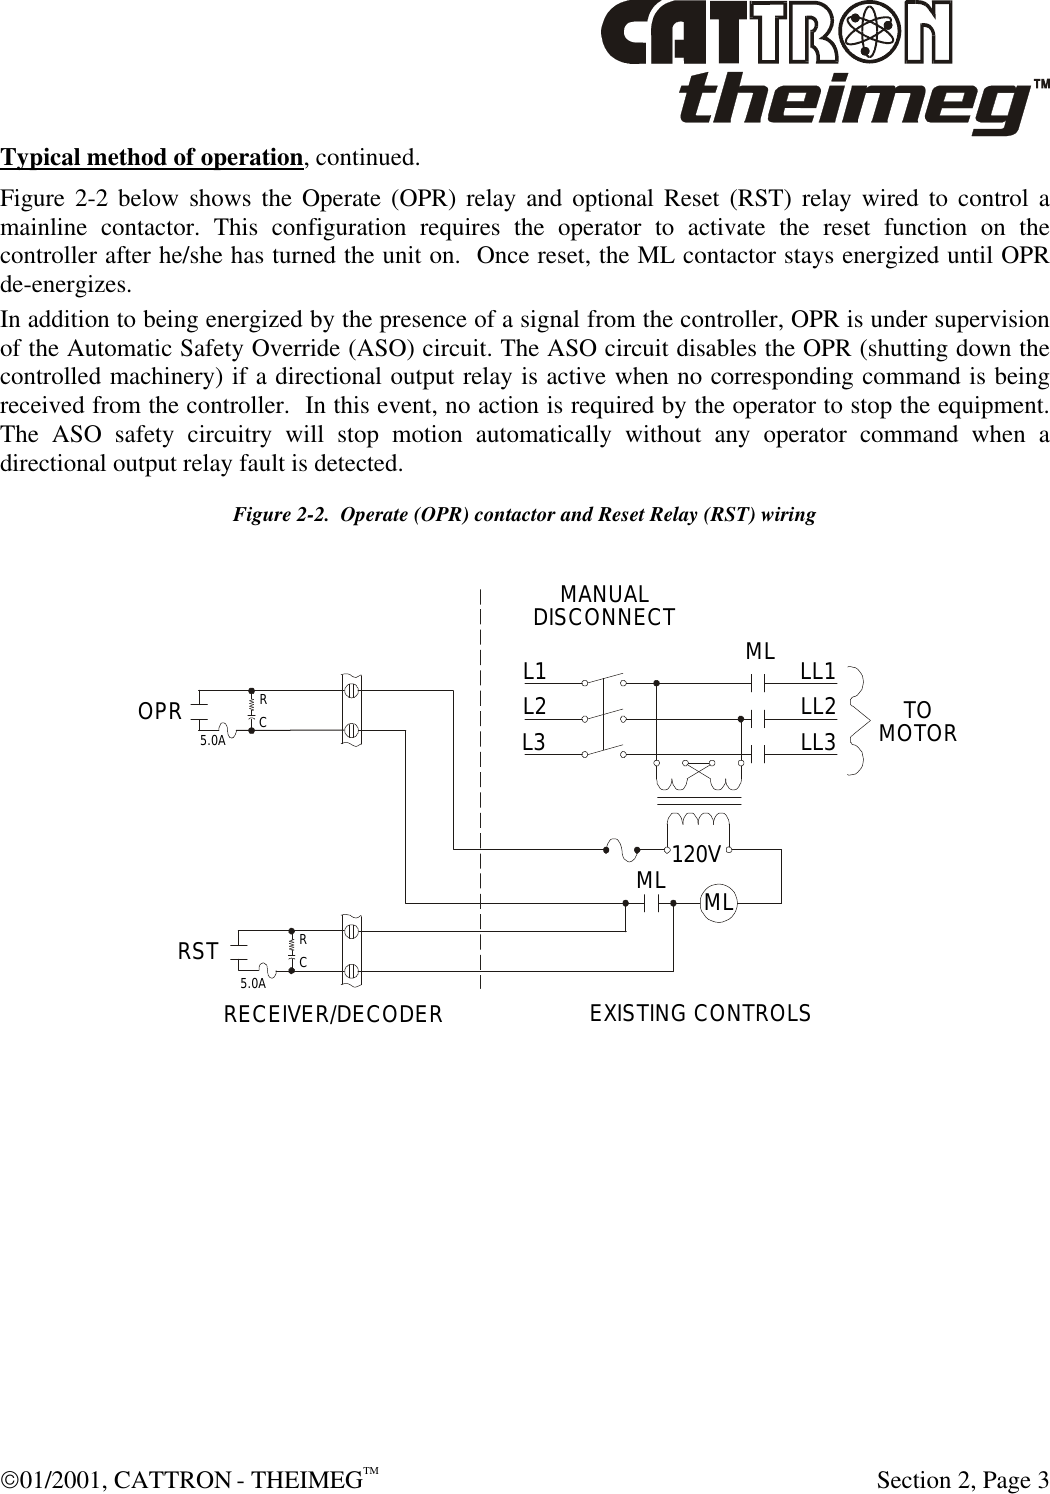  01/2001, CATTRON - THEIMEGTM  Section 2, Page 3 Typical method of operation, continued. Figure 2-2 below shows the Operate (OPR) relay and optional Reset (RST) relay wired to control a mainline contactor. This configuration requires the operator to activate the reset function on the controller after he/she has turned the unit on.  Once reset, the ML contactor stays energized until OPR de-energizes.  In addition to being energized by the presence of a signal from the controller, OPR is under supervision of the Automatic Safety Override (ASO) circuit. The ASO circuit disables the OPR (shutting down the controlled machinery) if a directional output relay is active when no corresponding command is being received from the controller.  In this event, no action is required by the operator to stop the equipment. The ASO safety circuitry will stop motion automatically without any operator command when a directional output relay fault is detected. Figure 2-2.  Operate (OPR) contactor and Reset Relay (RST) wiring OPR120VRSTRRCC5.0A5.0AL1MLMLMLMANUALDISCONNECTL2L3 LL1LL2LL3 TOMOTORRECEIVER/DECODEREXISTING CONTROLS 